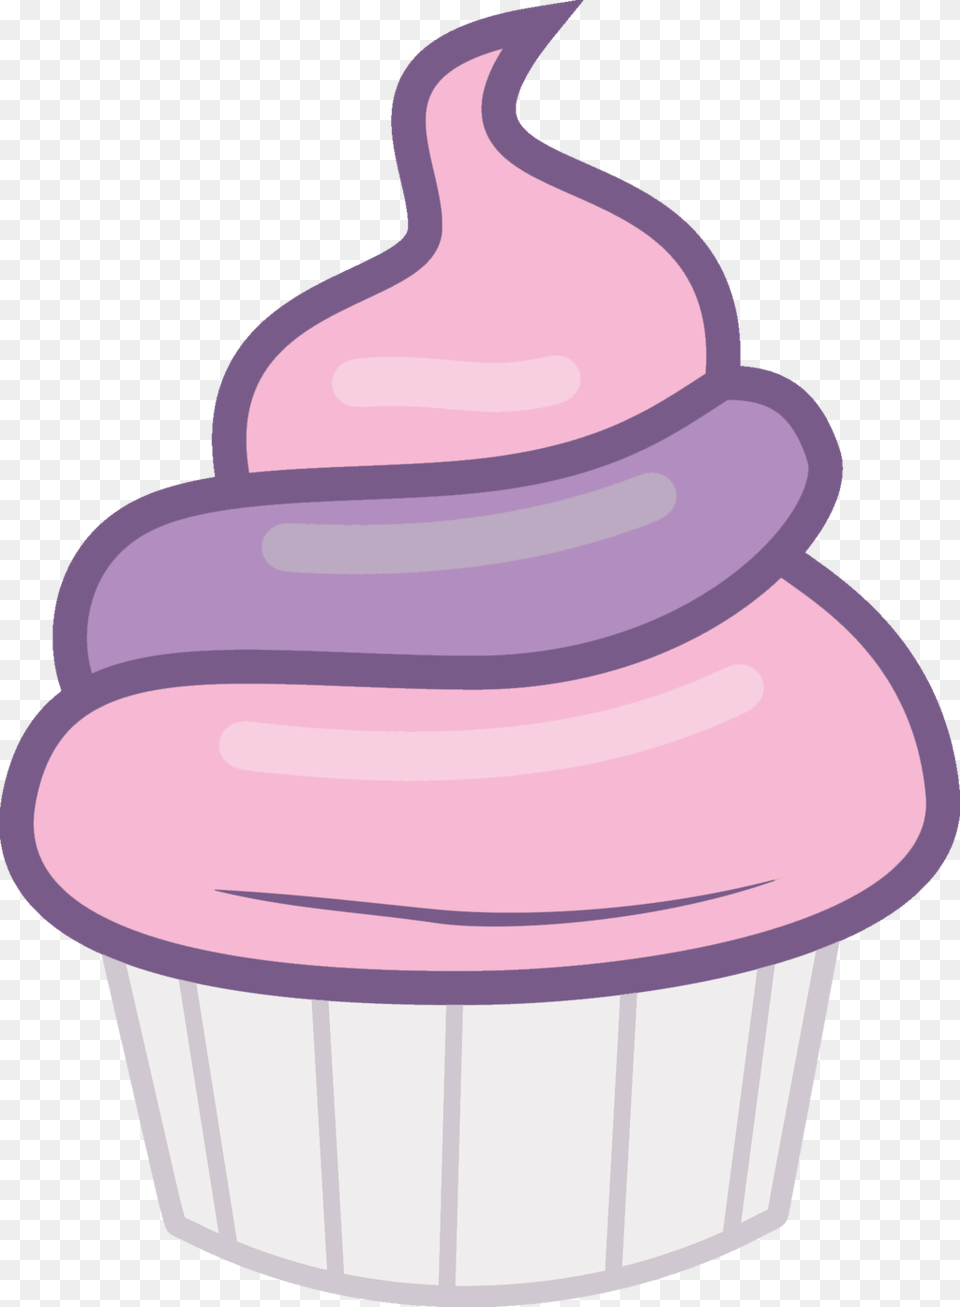 Cupcake Vector Colorful Transparent Background Cupcake Clipart, Cake, Cream, Dessert, Food Free Png